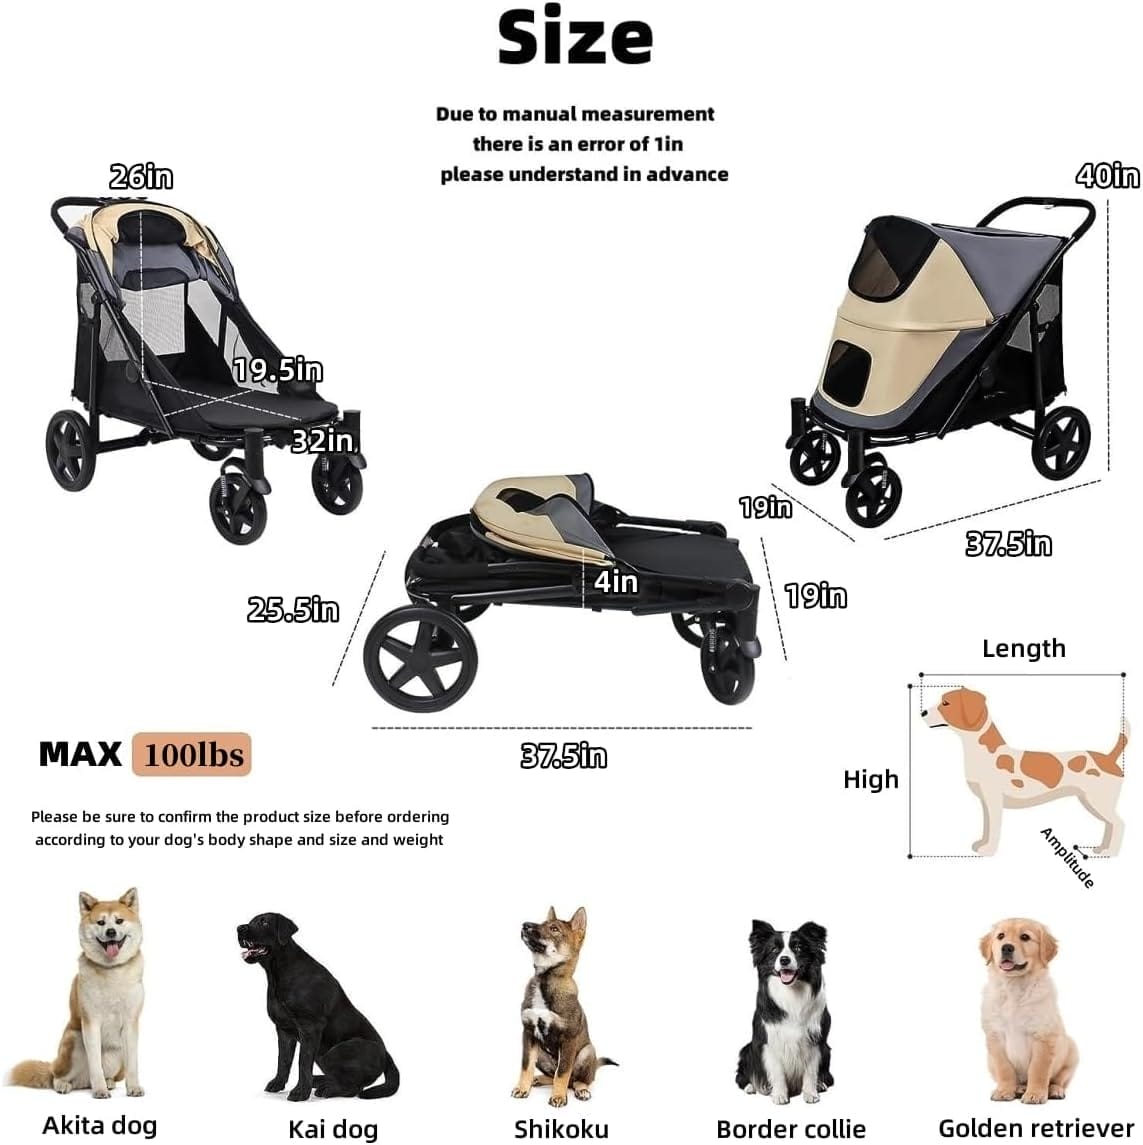 Dog Stroller for Medium/Large Dogs One-Key Folding Totoro ball 4 Wheel Pet Stroller Foldable Dog Stroller for 2 Dogs Jogger Stroller with Storage Pocket Suitable for Pets Up to 110LBS (BeigeGrey)